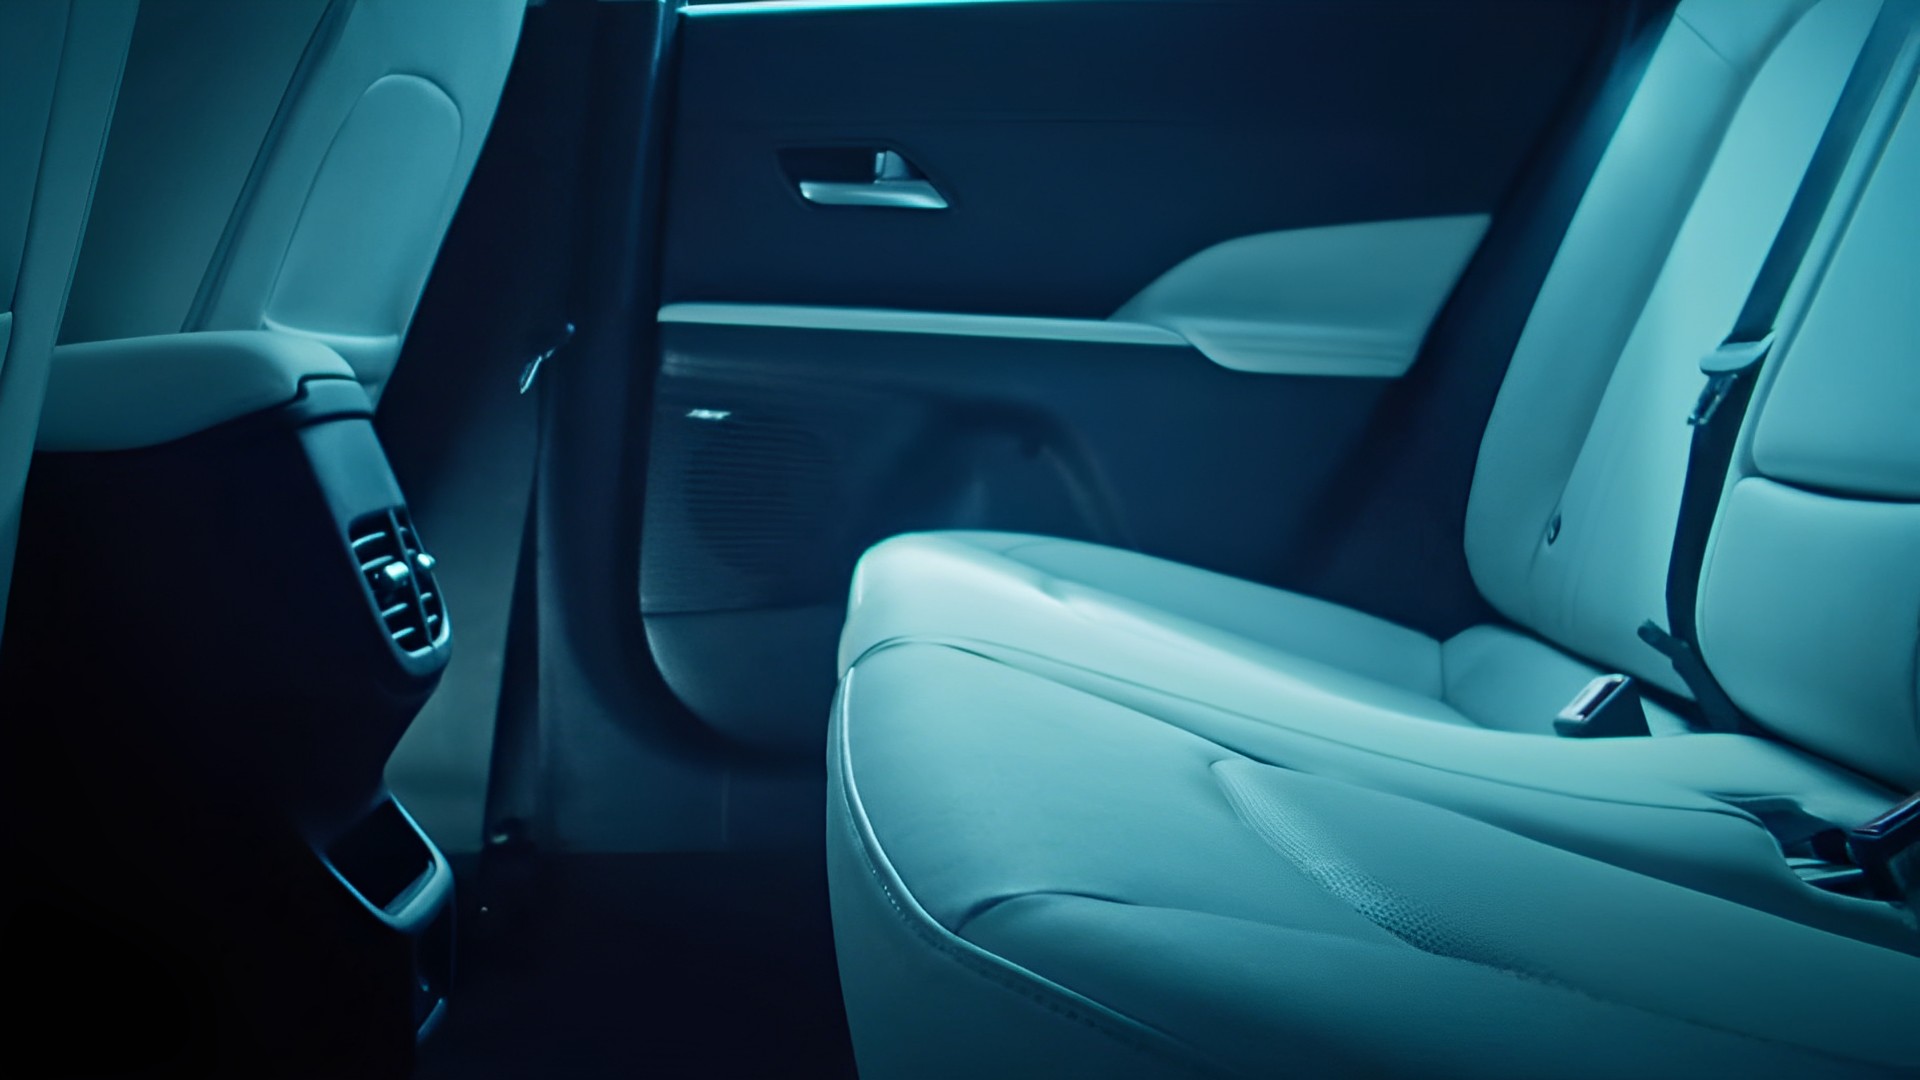 More teasers of the next-gen Hyundai Accent rear seats